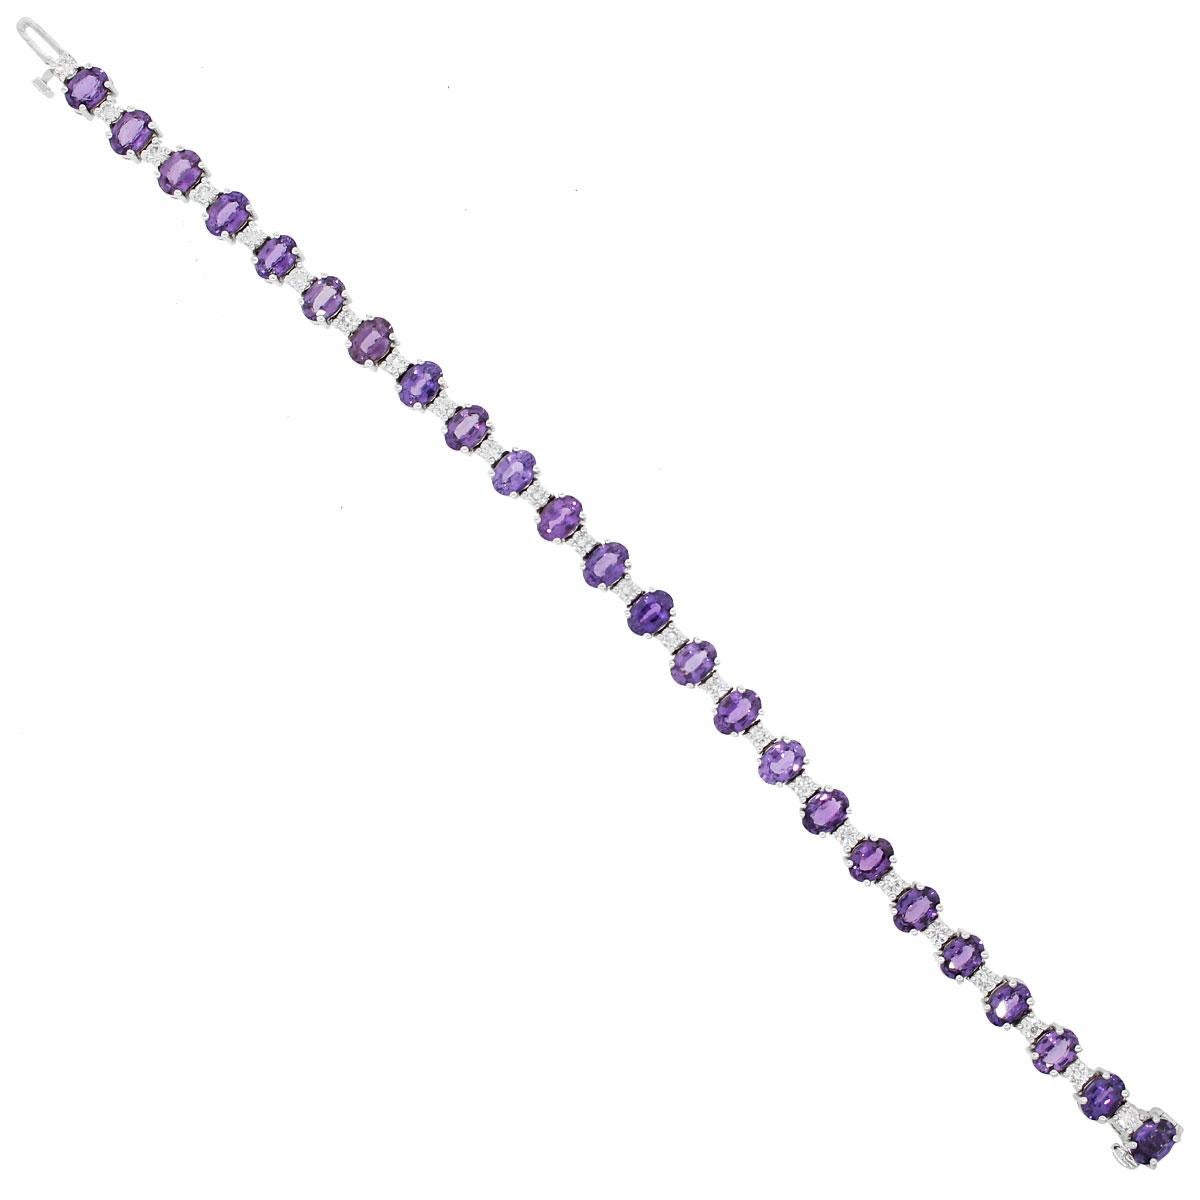 Material: 18k white gold
Diamond Details: Approximately 1.52ctw of round brilliant diamonds. Diamonds are G/H in color and VS in clarity.
Gemstone Details: Approximately 15.50ctw of oval cut purple sapphire gemstones.
Clasp: Tongue in box